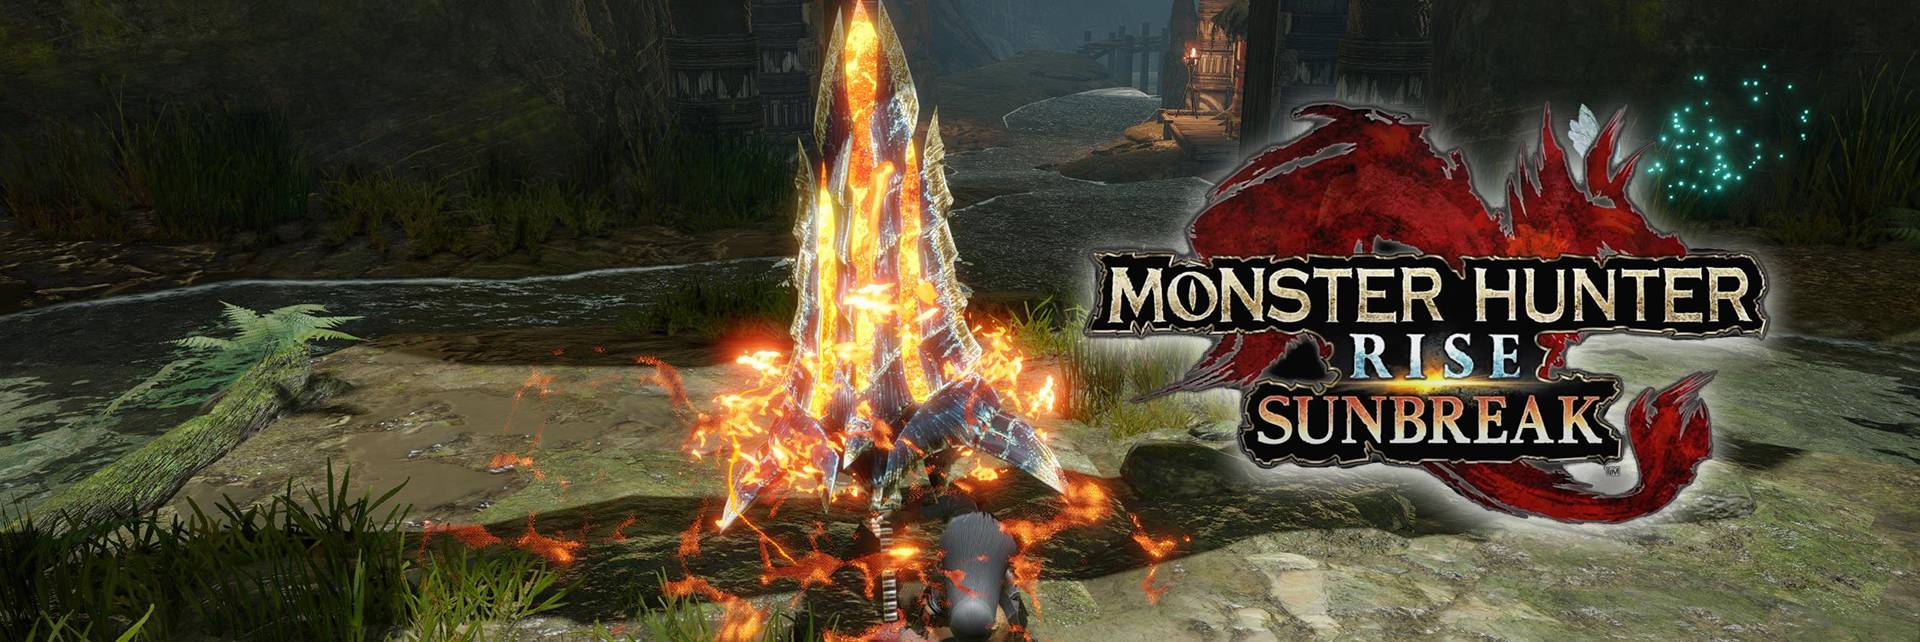 HOW to INSTALL MODS in MONSTER HUNTER RISE 